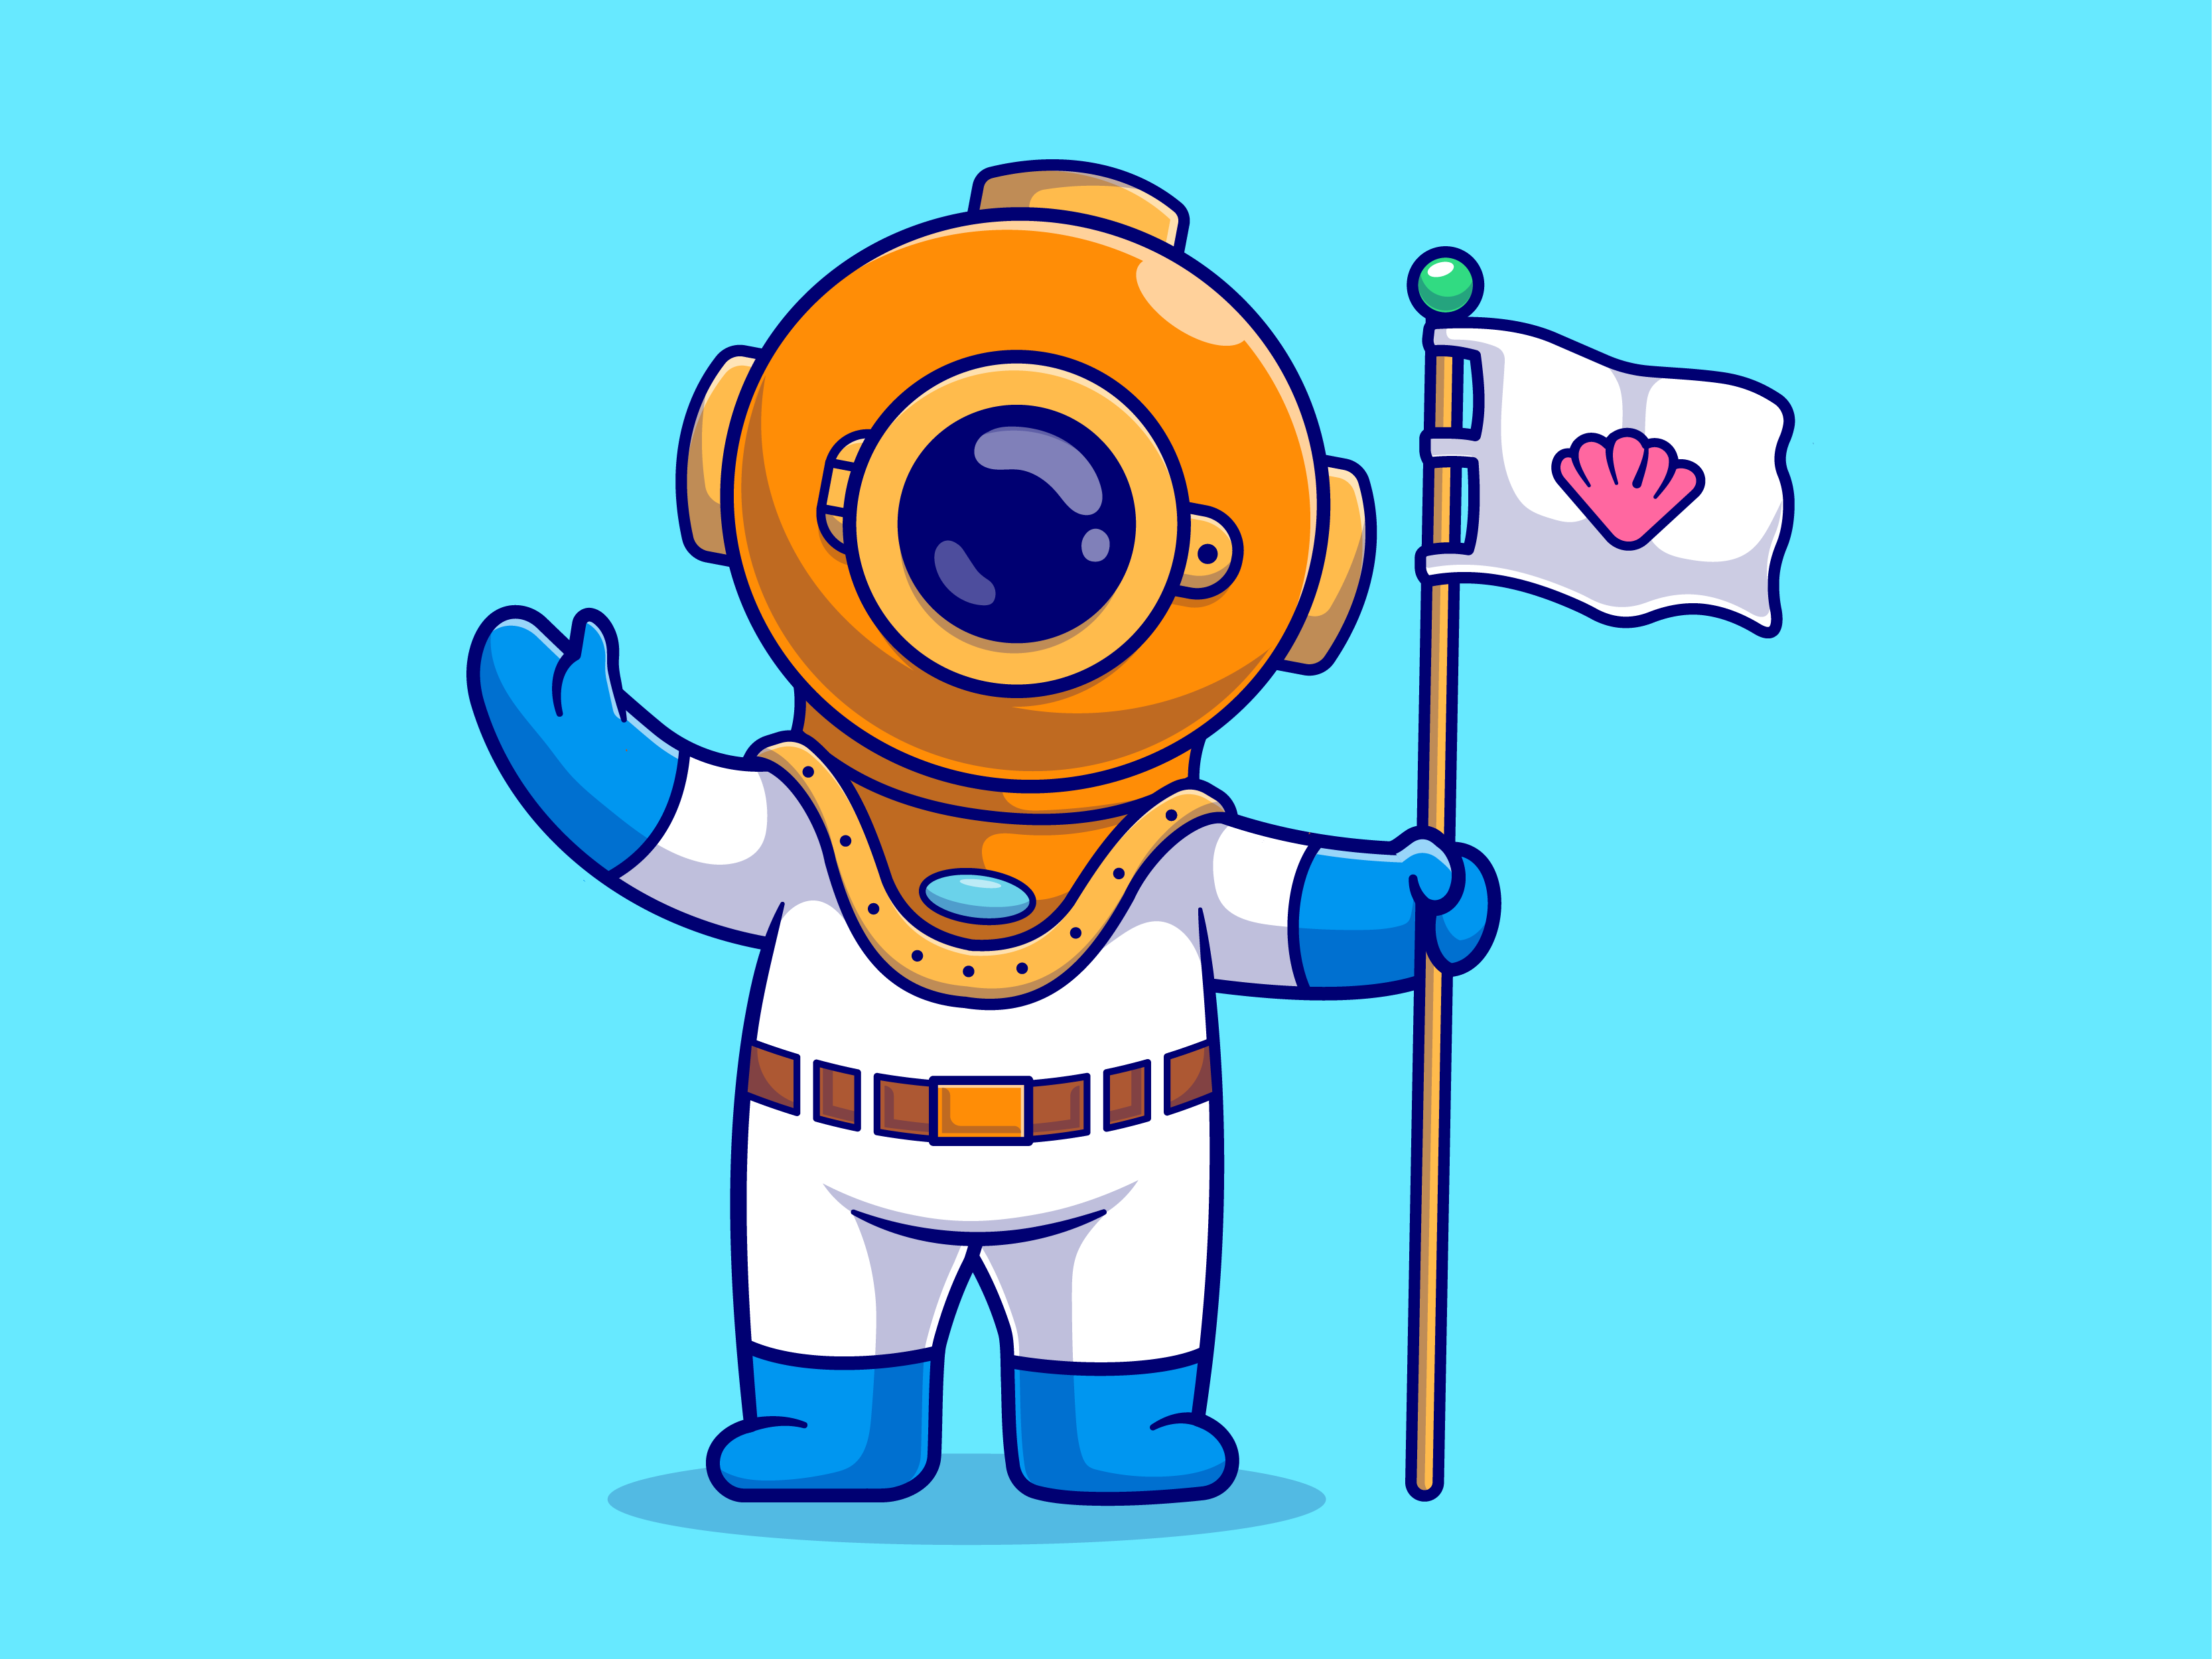 Diver🌊🧑🏻‍🚀 by catalyst on Dribbble